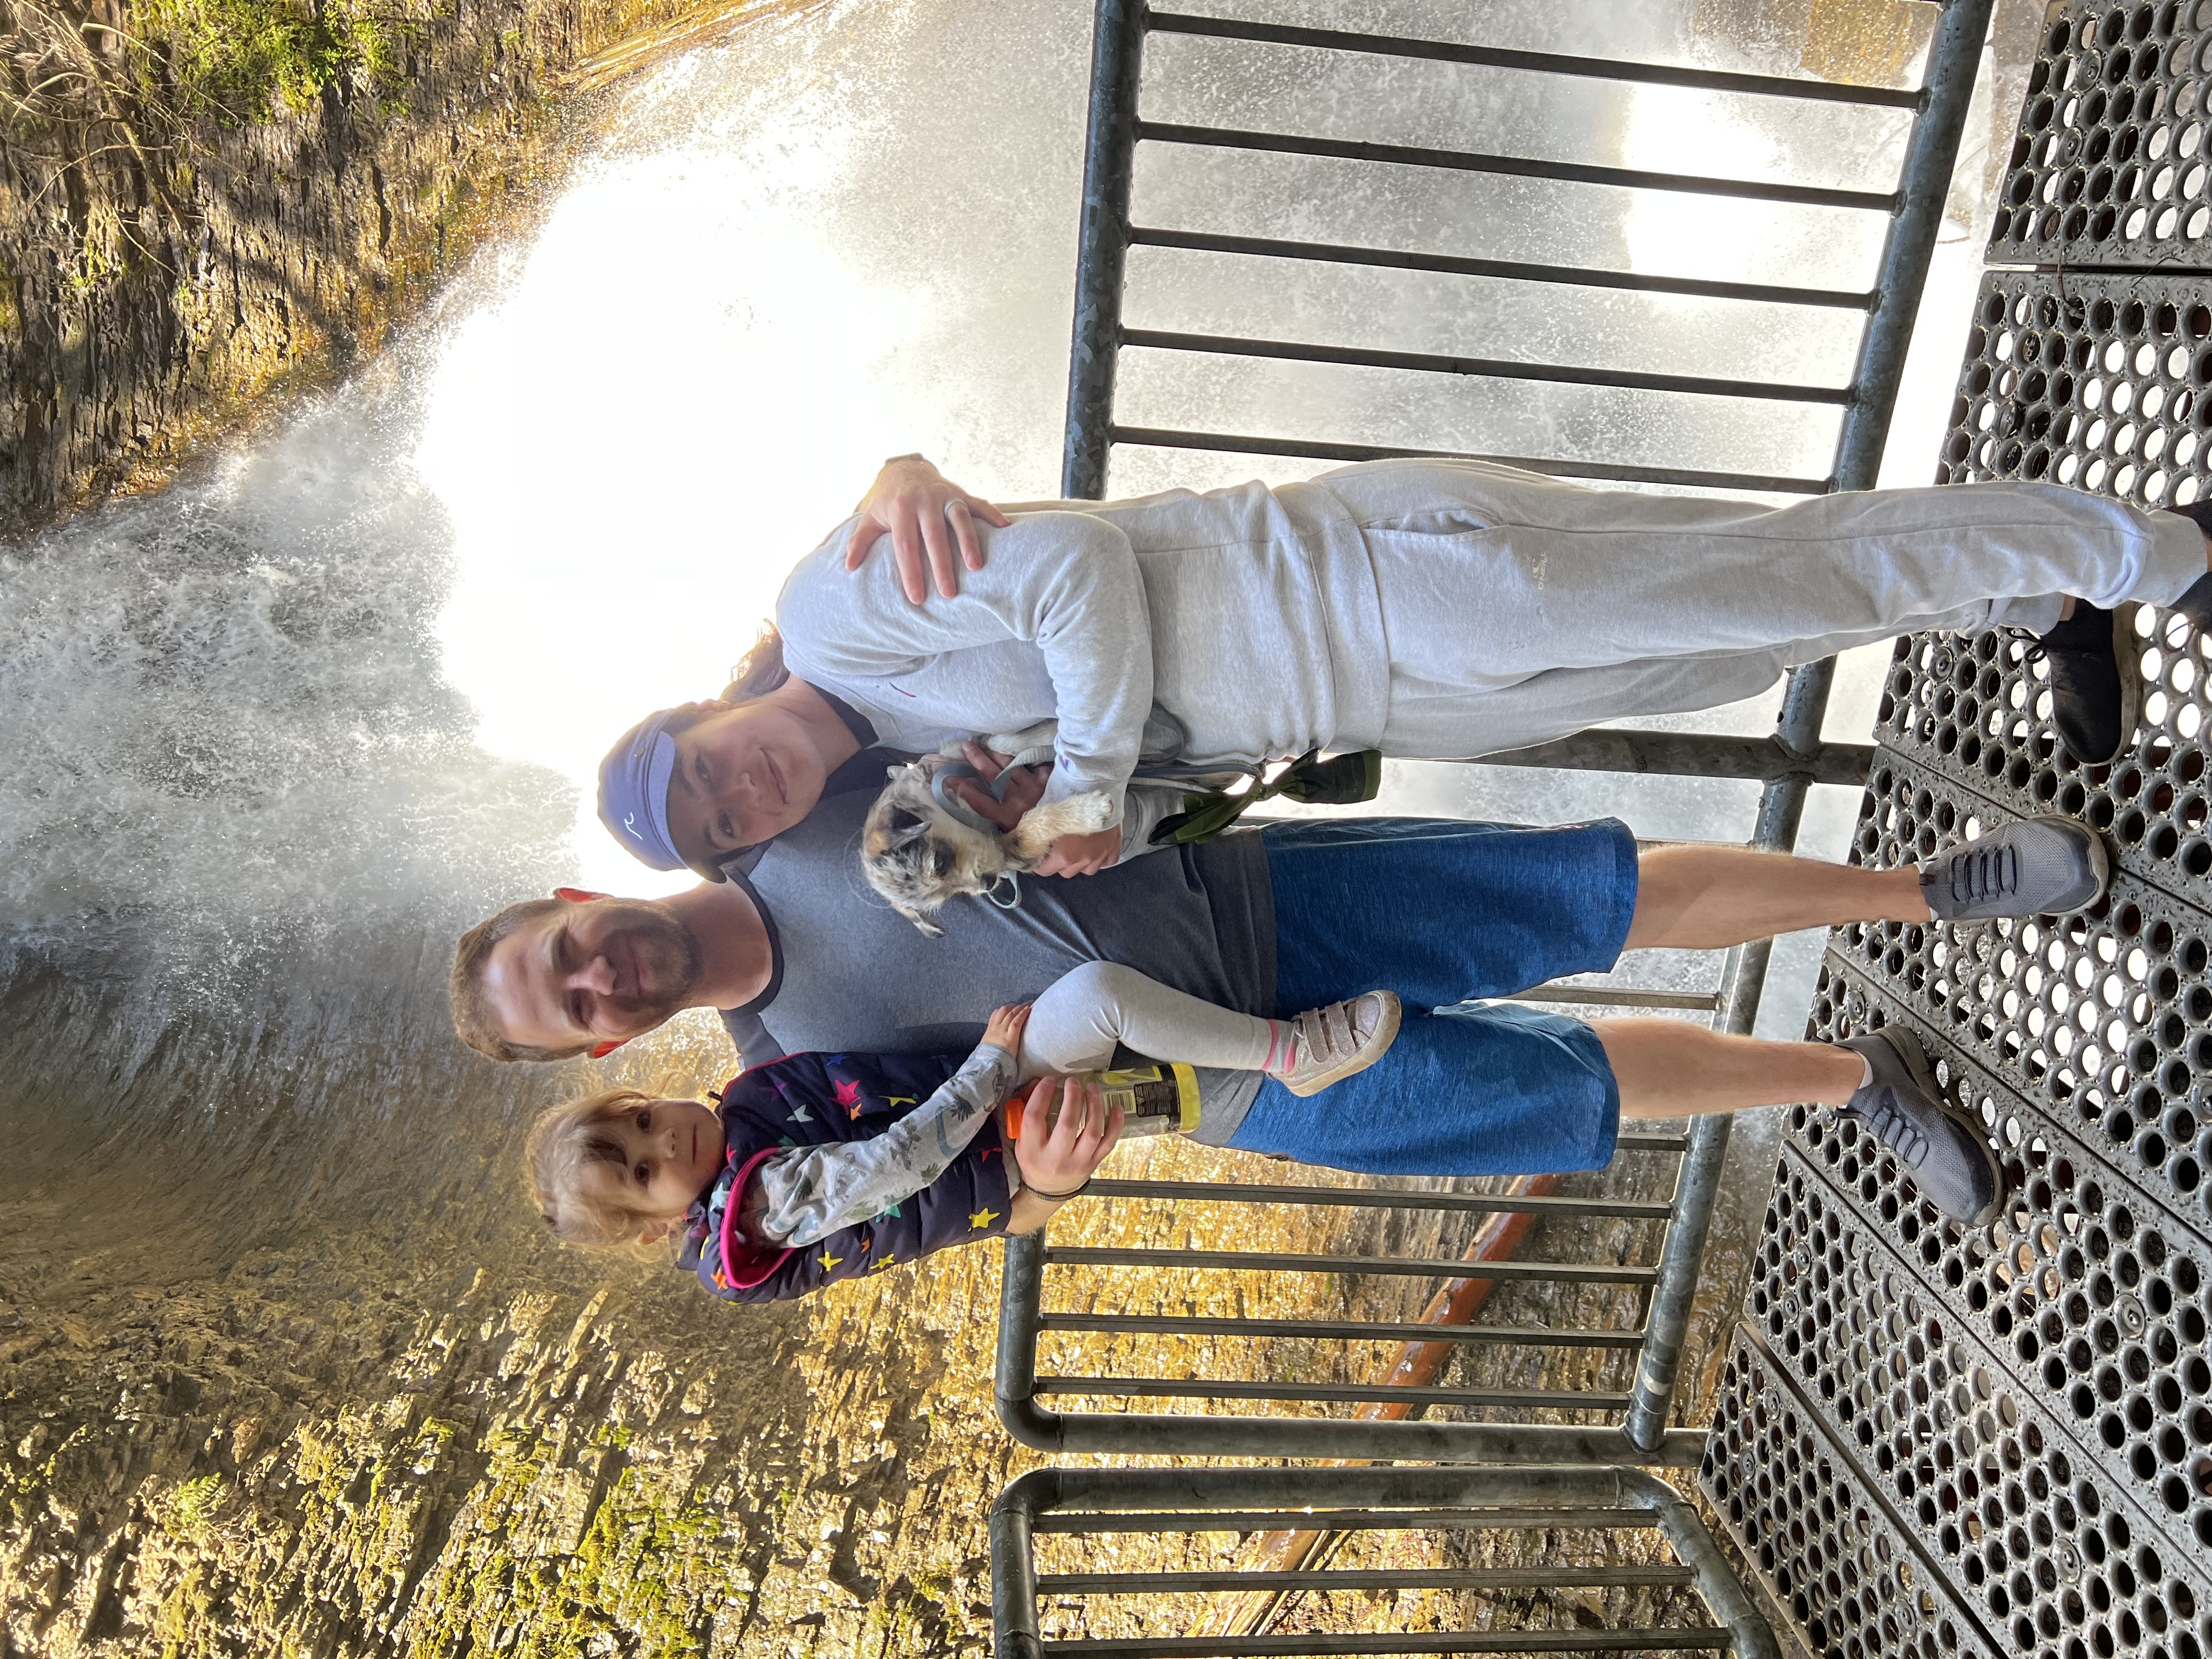 A mom in white shirt and pants, a dad in blue shorts and tshirt and a child in his arms stand together on a metal platform in front of a waterfall